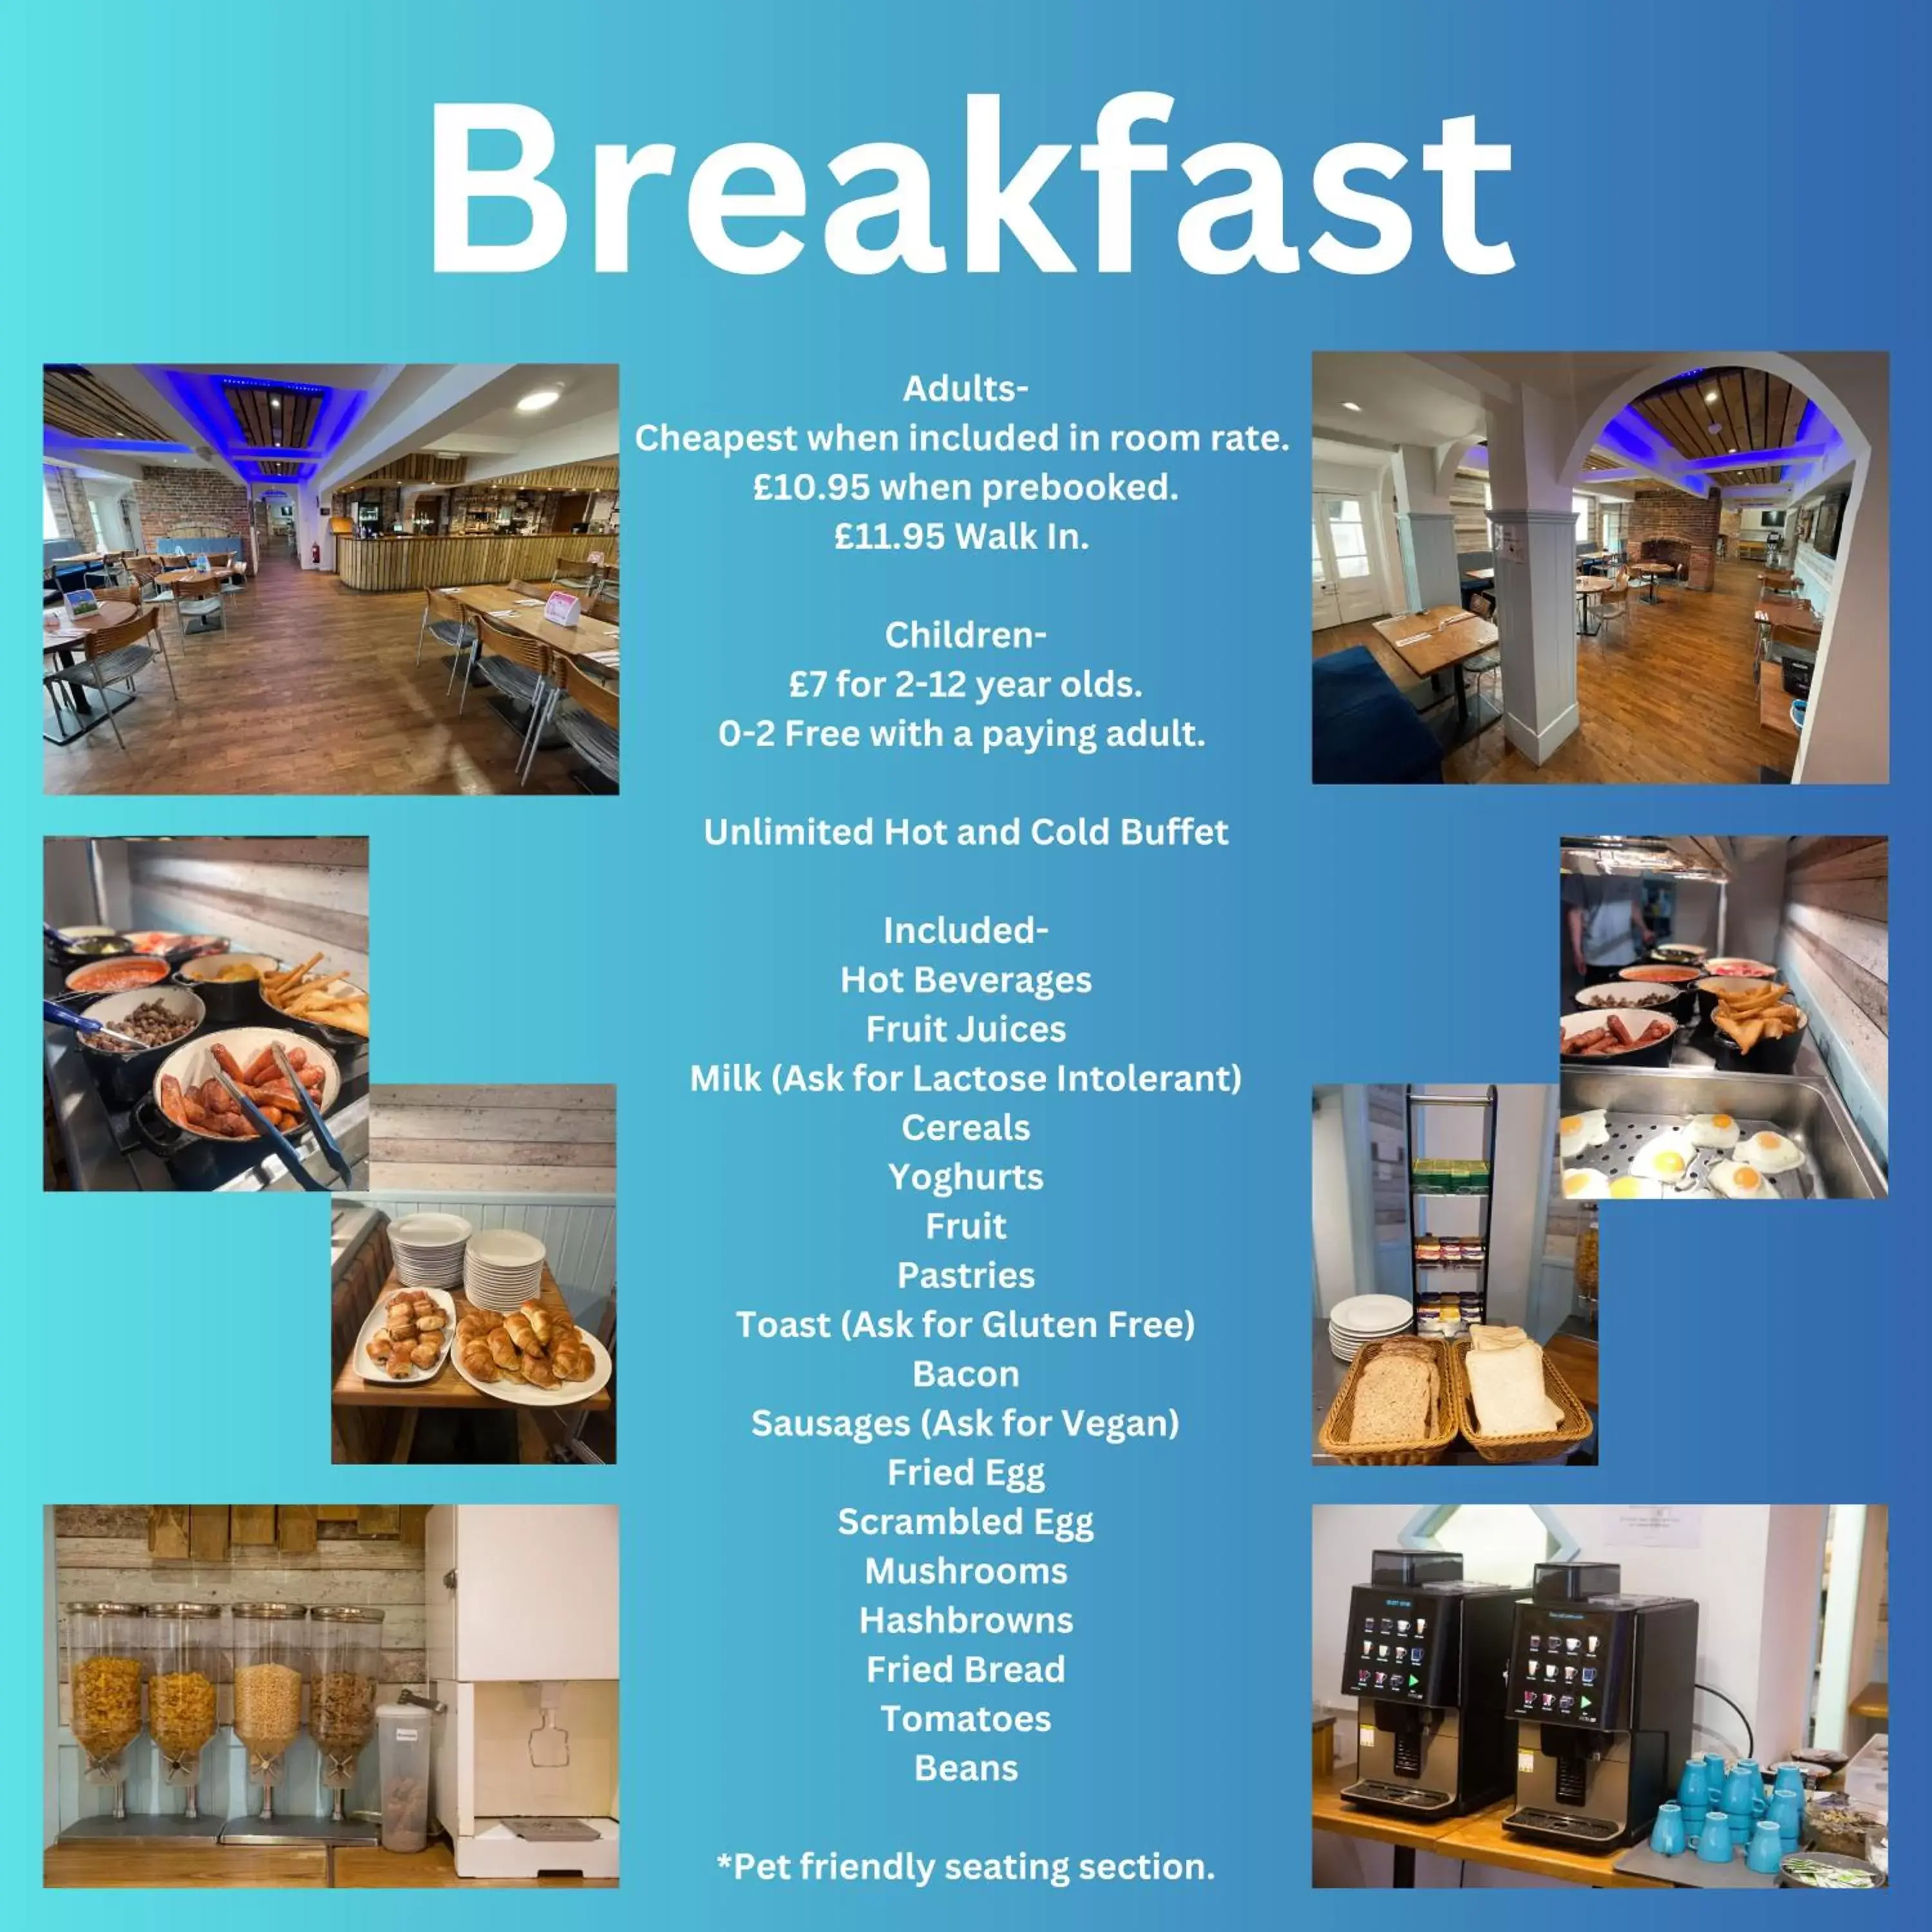 Breakfast in The Jubilee Hotel - with Spa and Restaurant and Entertainment